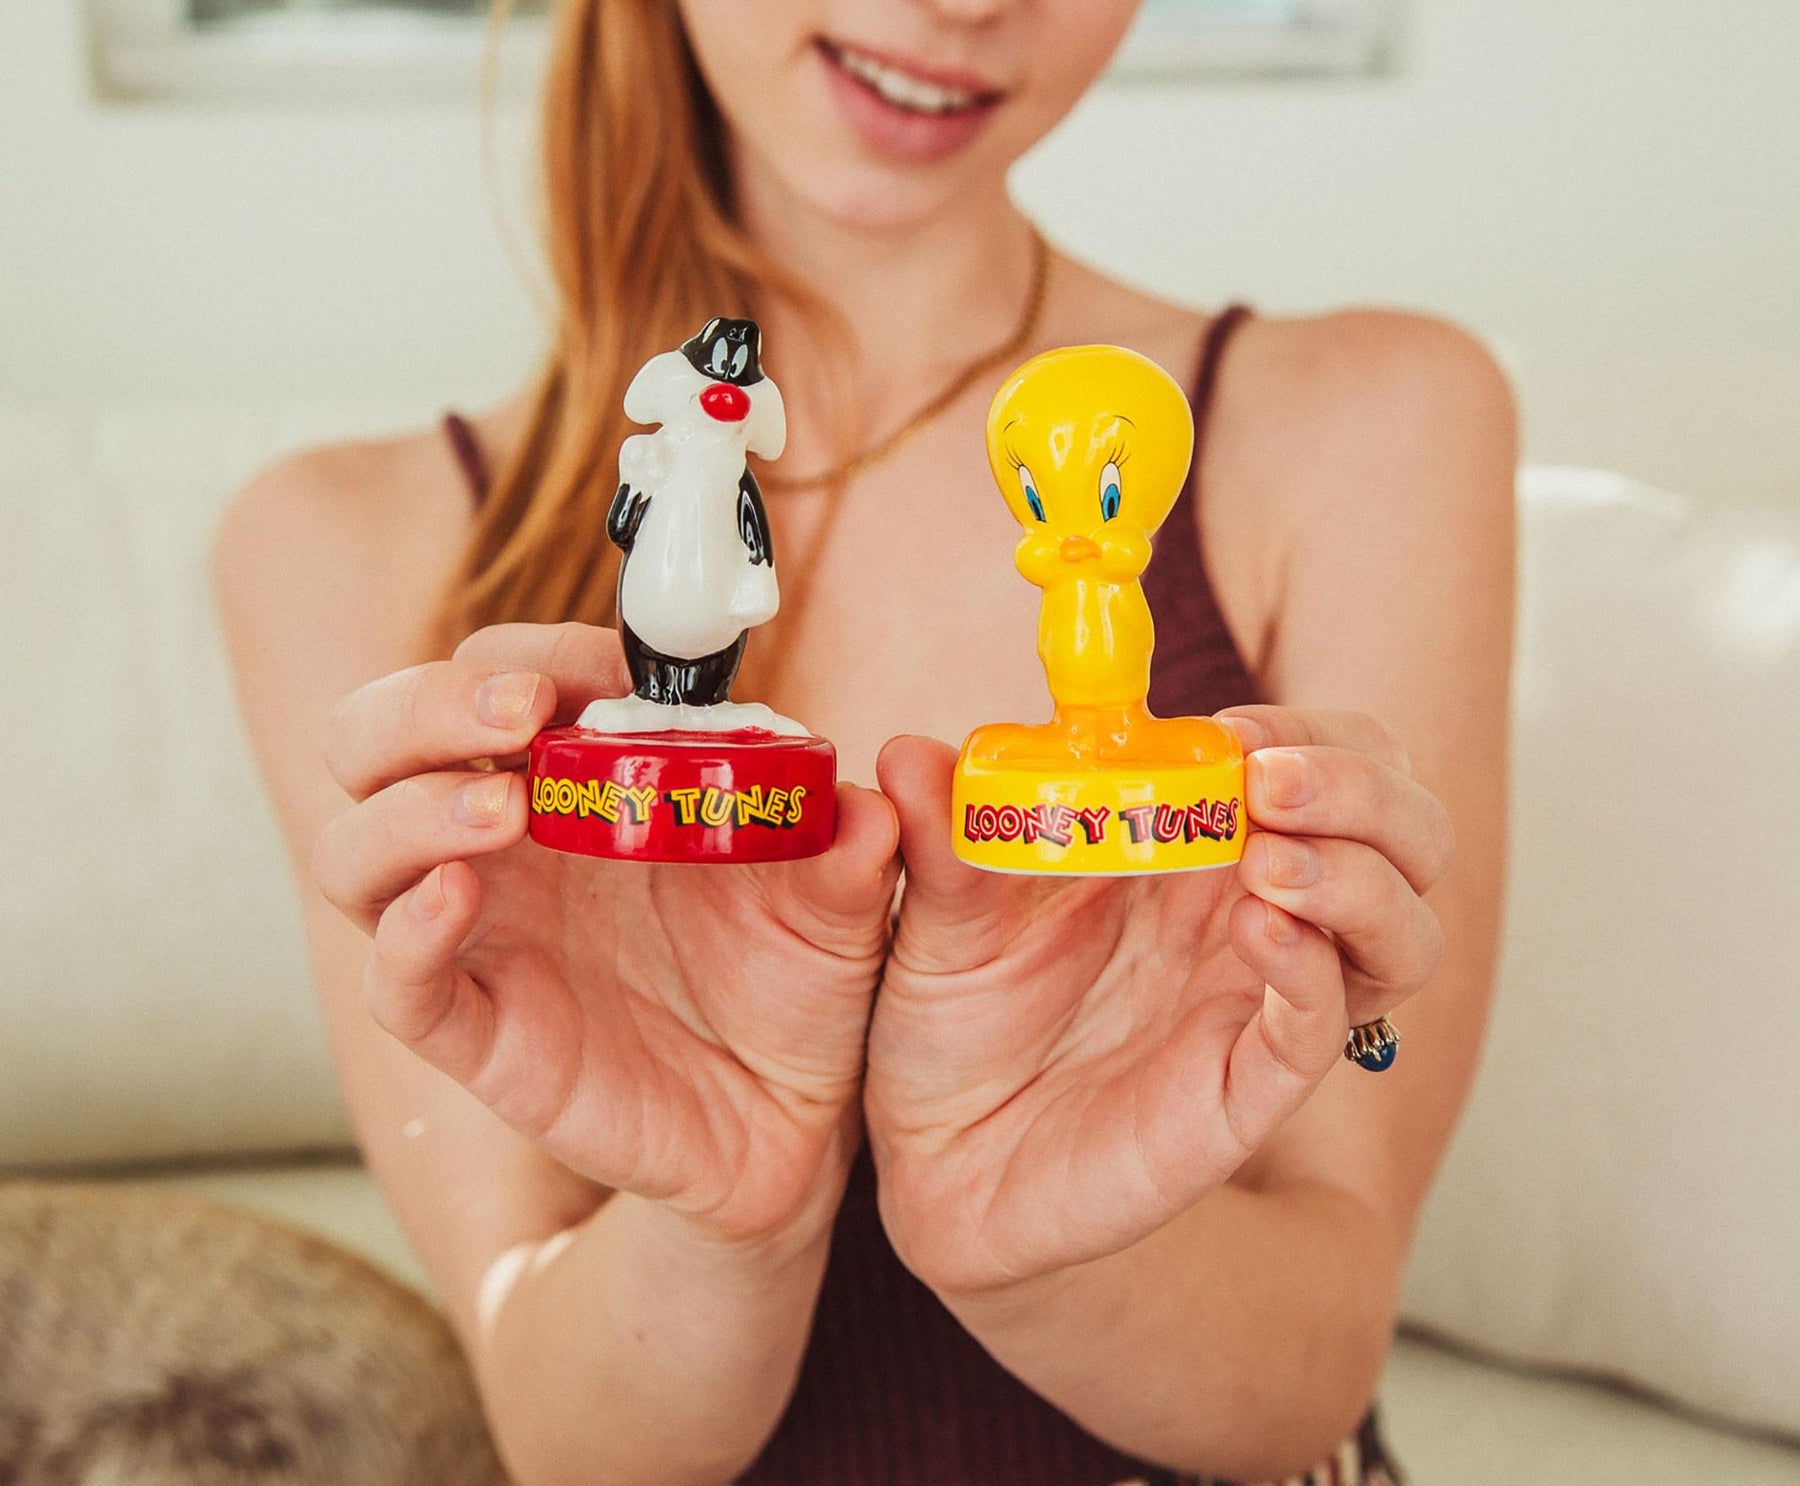 Looney Tunes Sylvester and Tweety Ceramic Salt and Pepper Shakers | Set of 2